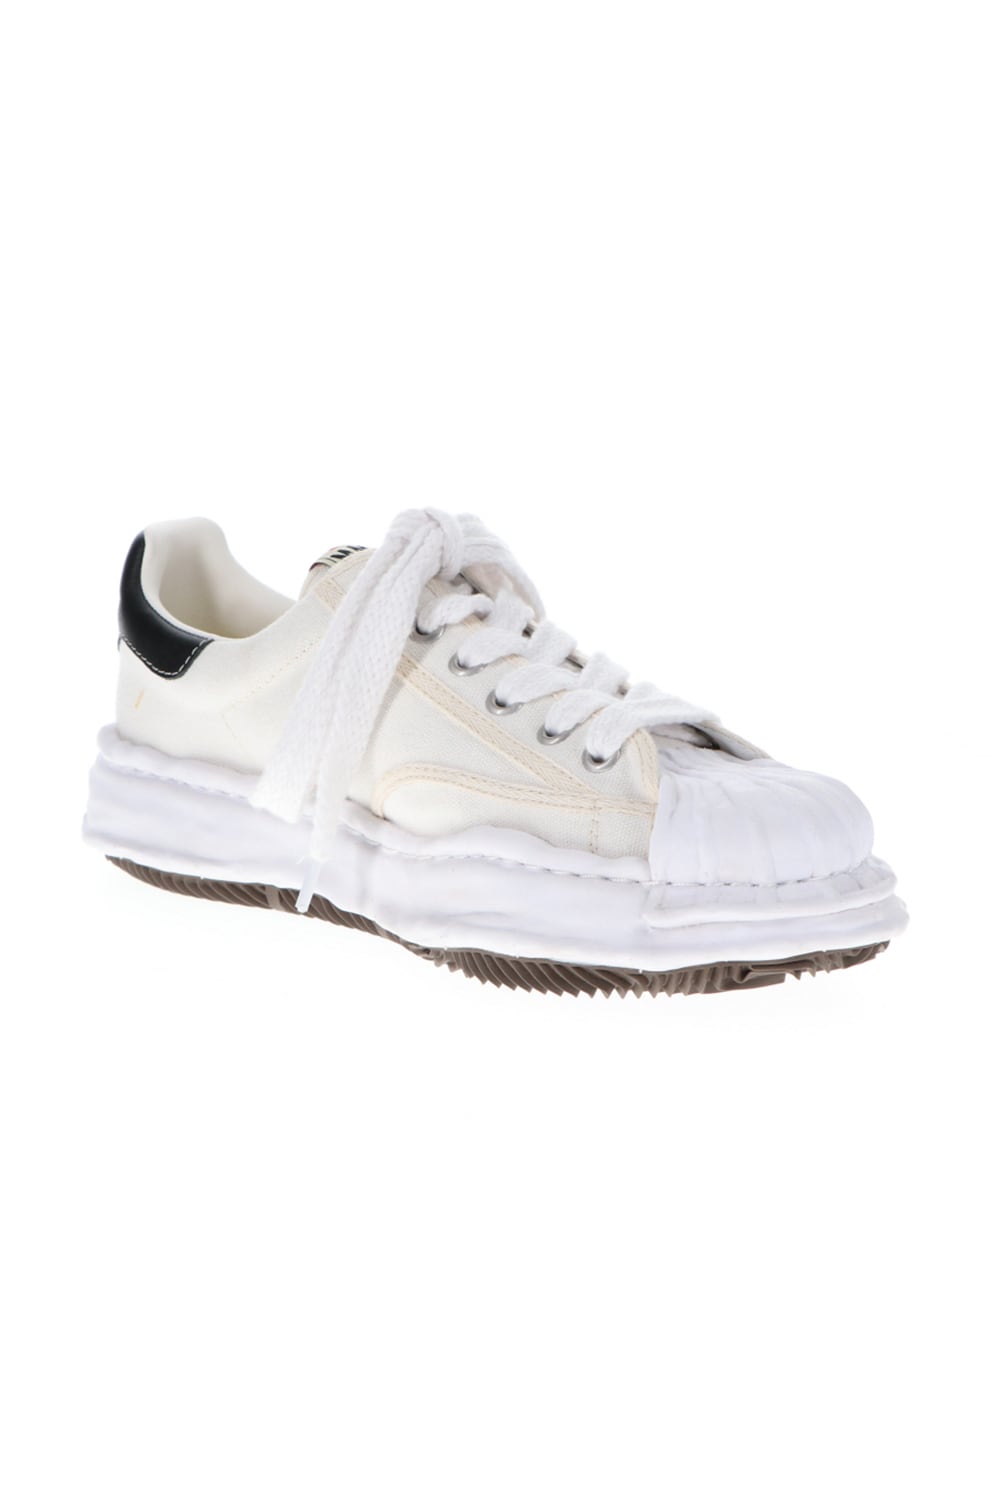 -BLAKEY Low- Original STC sole canvas Low-cut sneakers White Delivery November